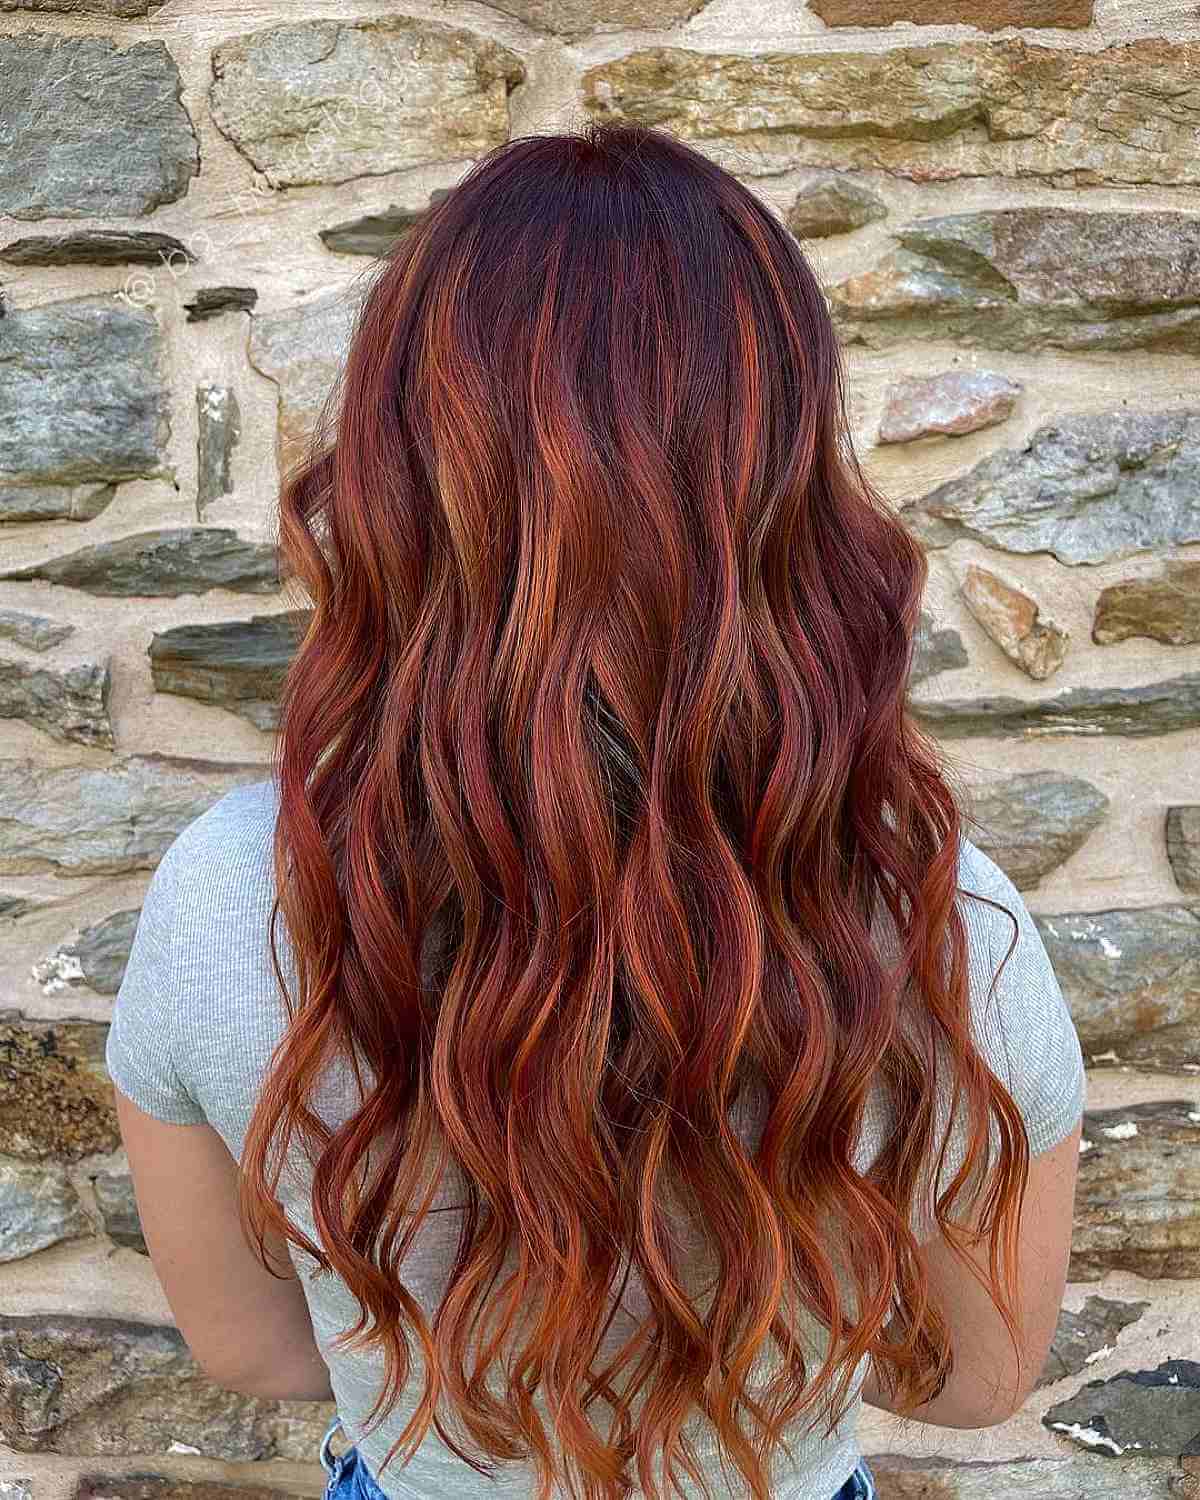 Top 15 Fall Hair Colors of 2022, According to Colorists this Autumn